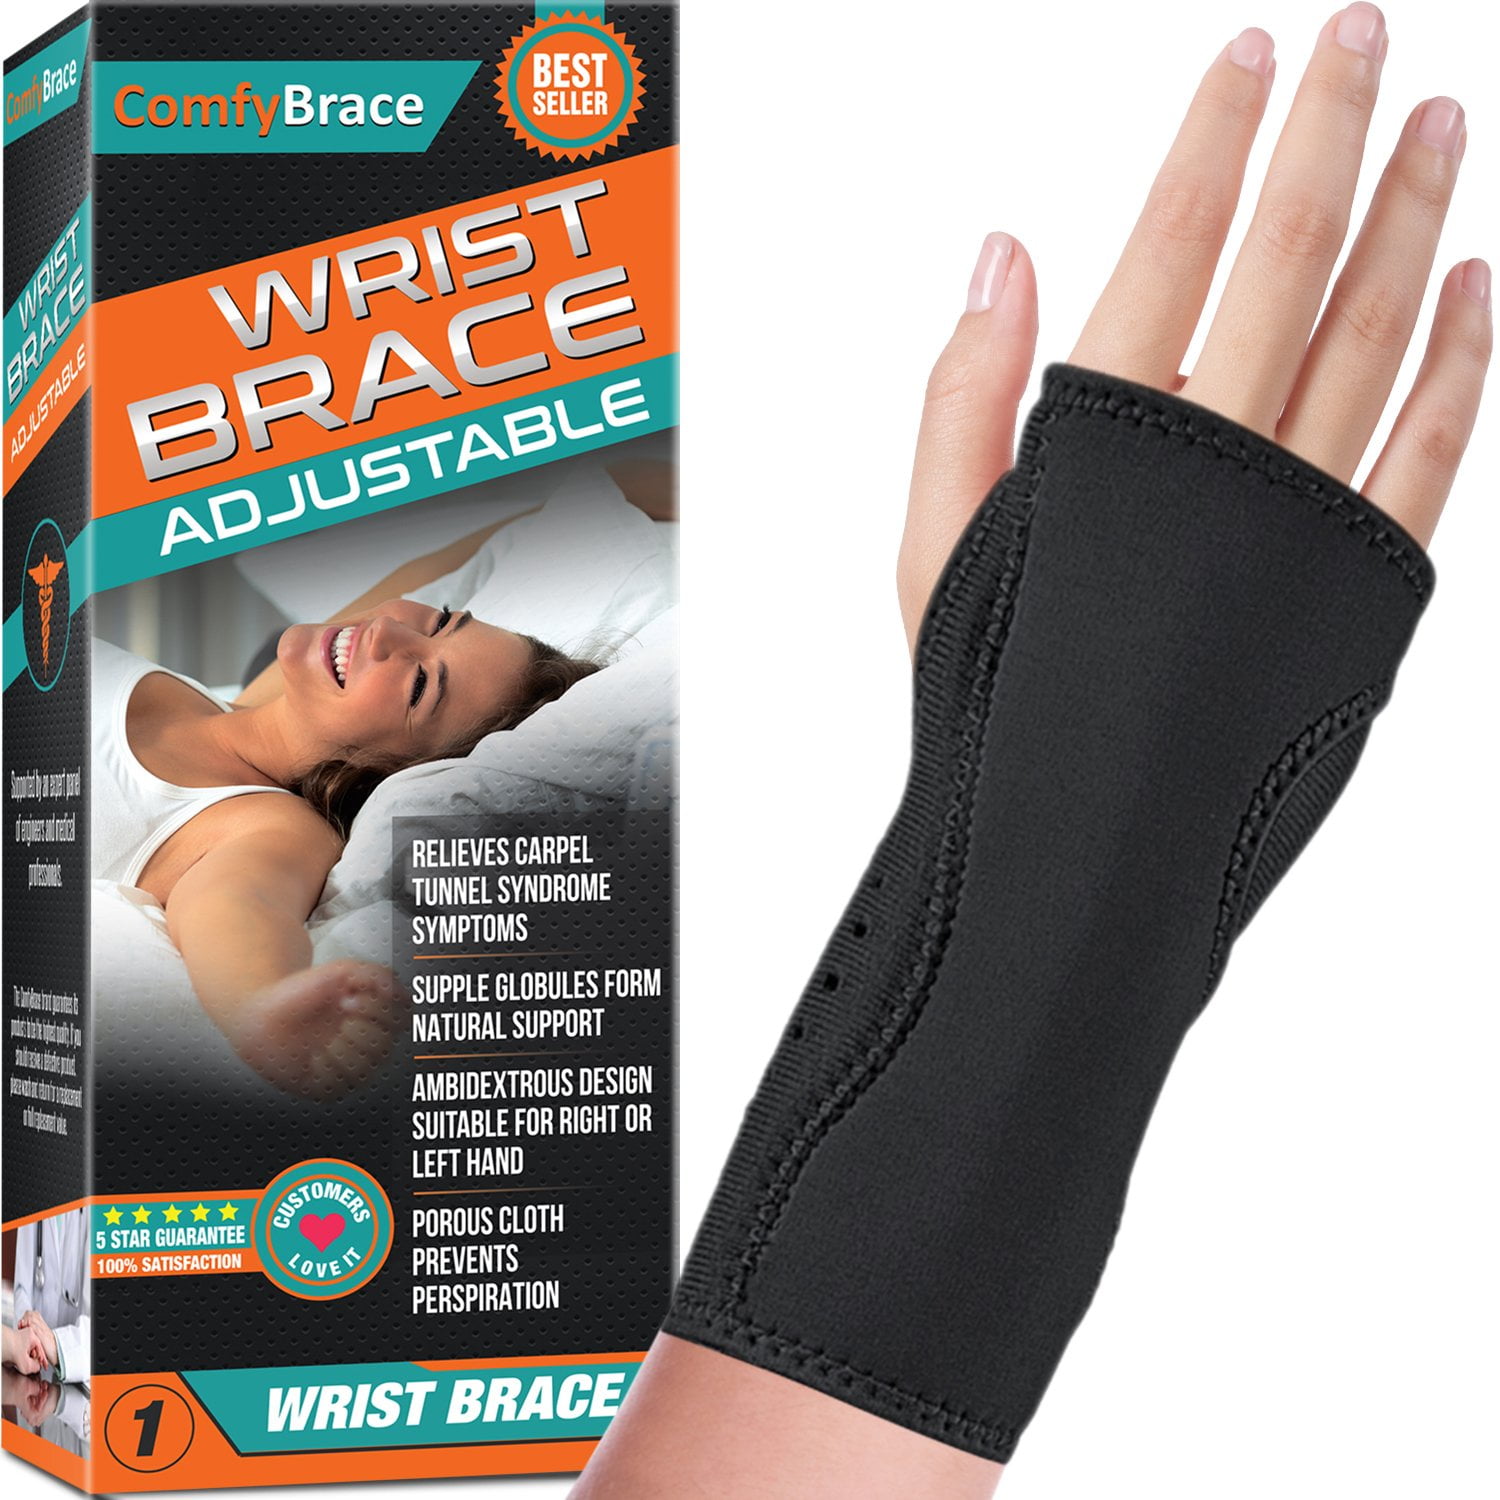 RSI & More Palm Protector with Gel Pad Optimum Comfort for Arthritis Carpal Tunnel Black, Large Doctor Developed Wrist & Hand Compression Sleeve/Support/Brace & Doctor Written Handbook 